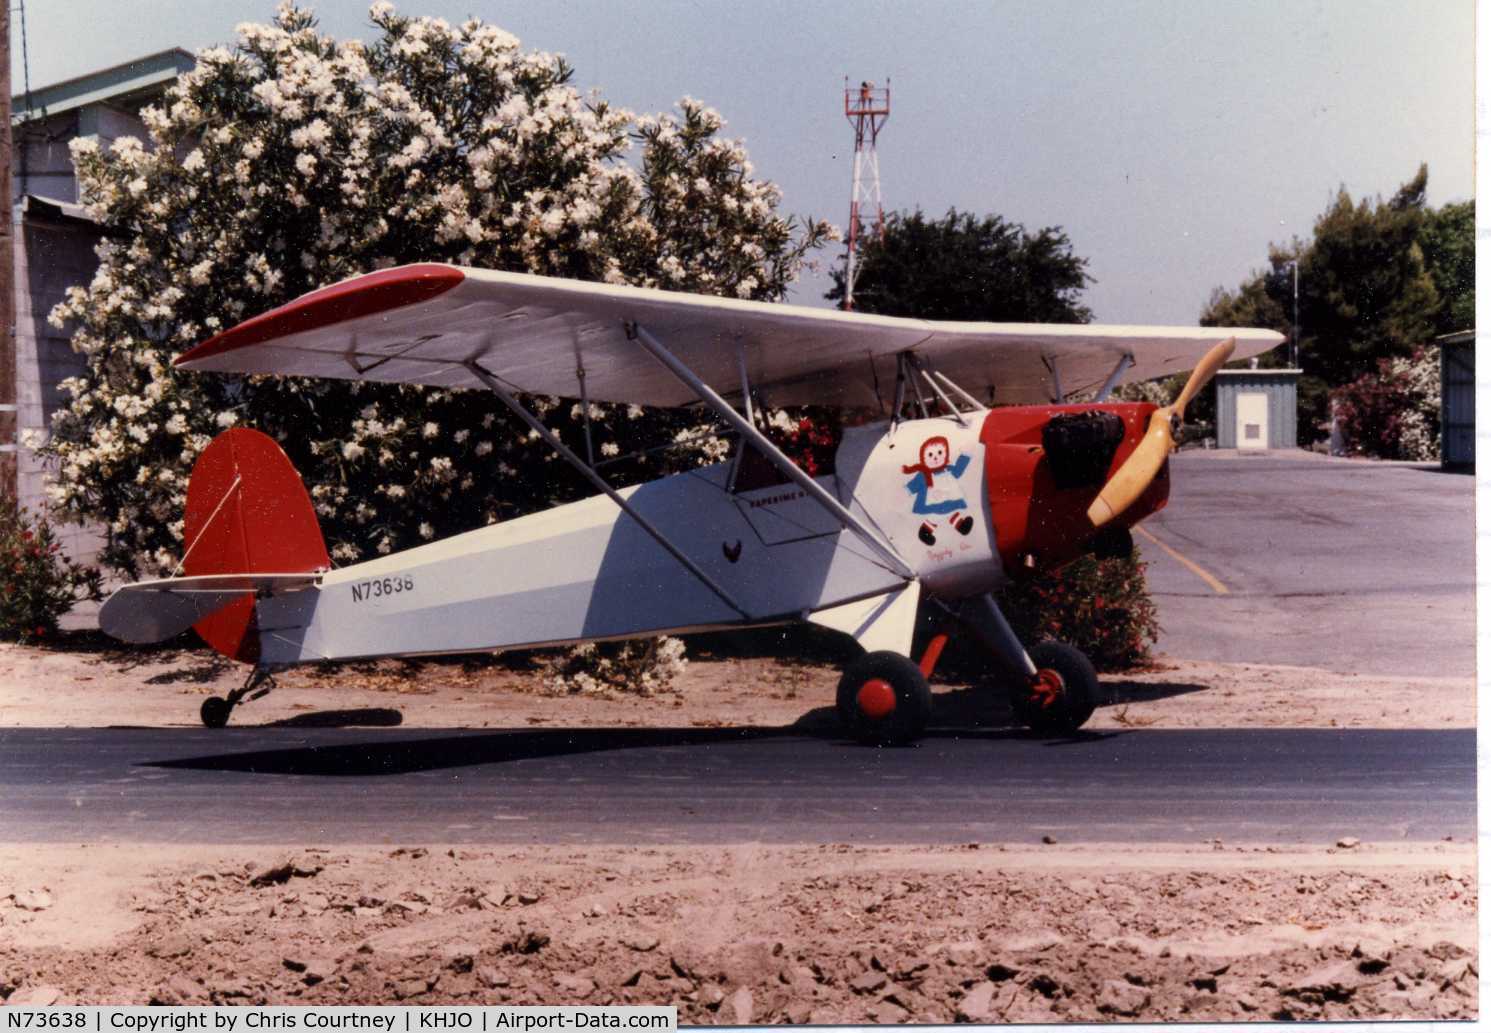 N73638, 1963 Corben Baby Ace Model A C/N 638, I recently came across this picture of N73638 that was taken in about 1985, in Hanford, California. It was owned by Chris Courtney, and was  known as the 